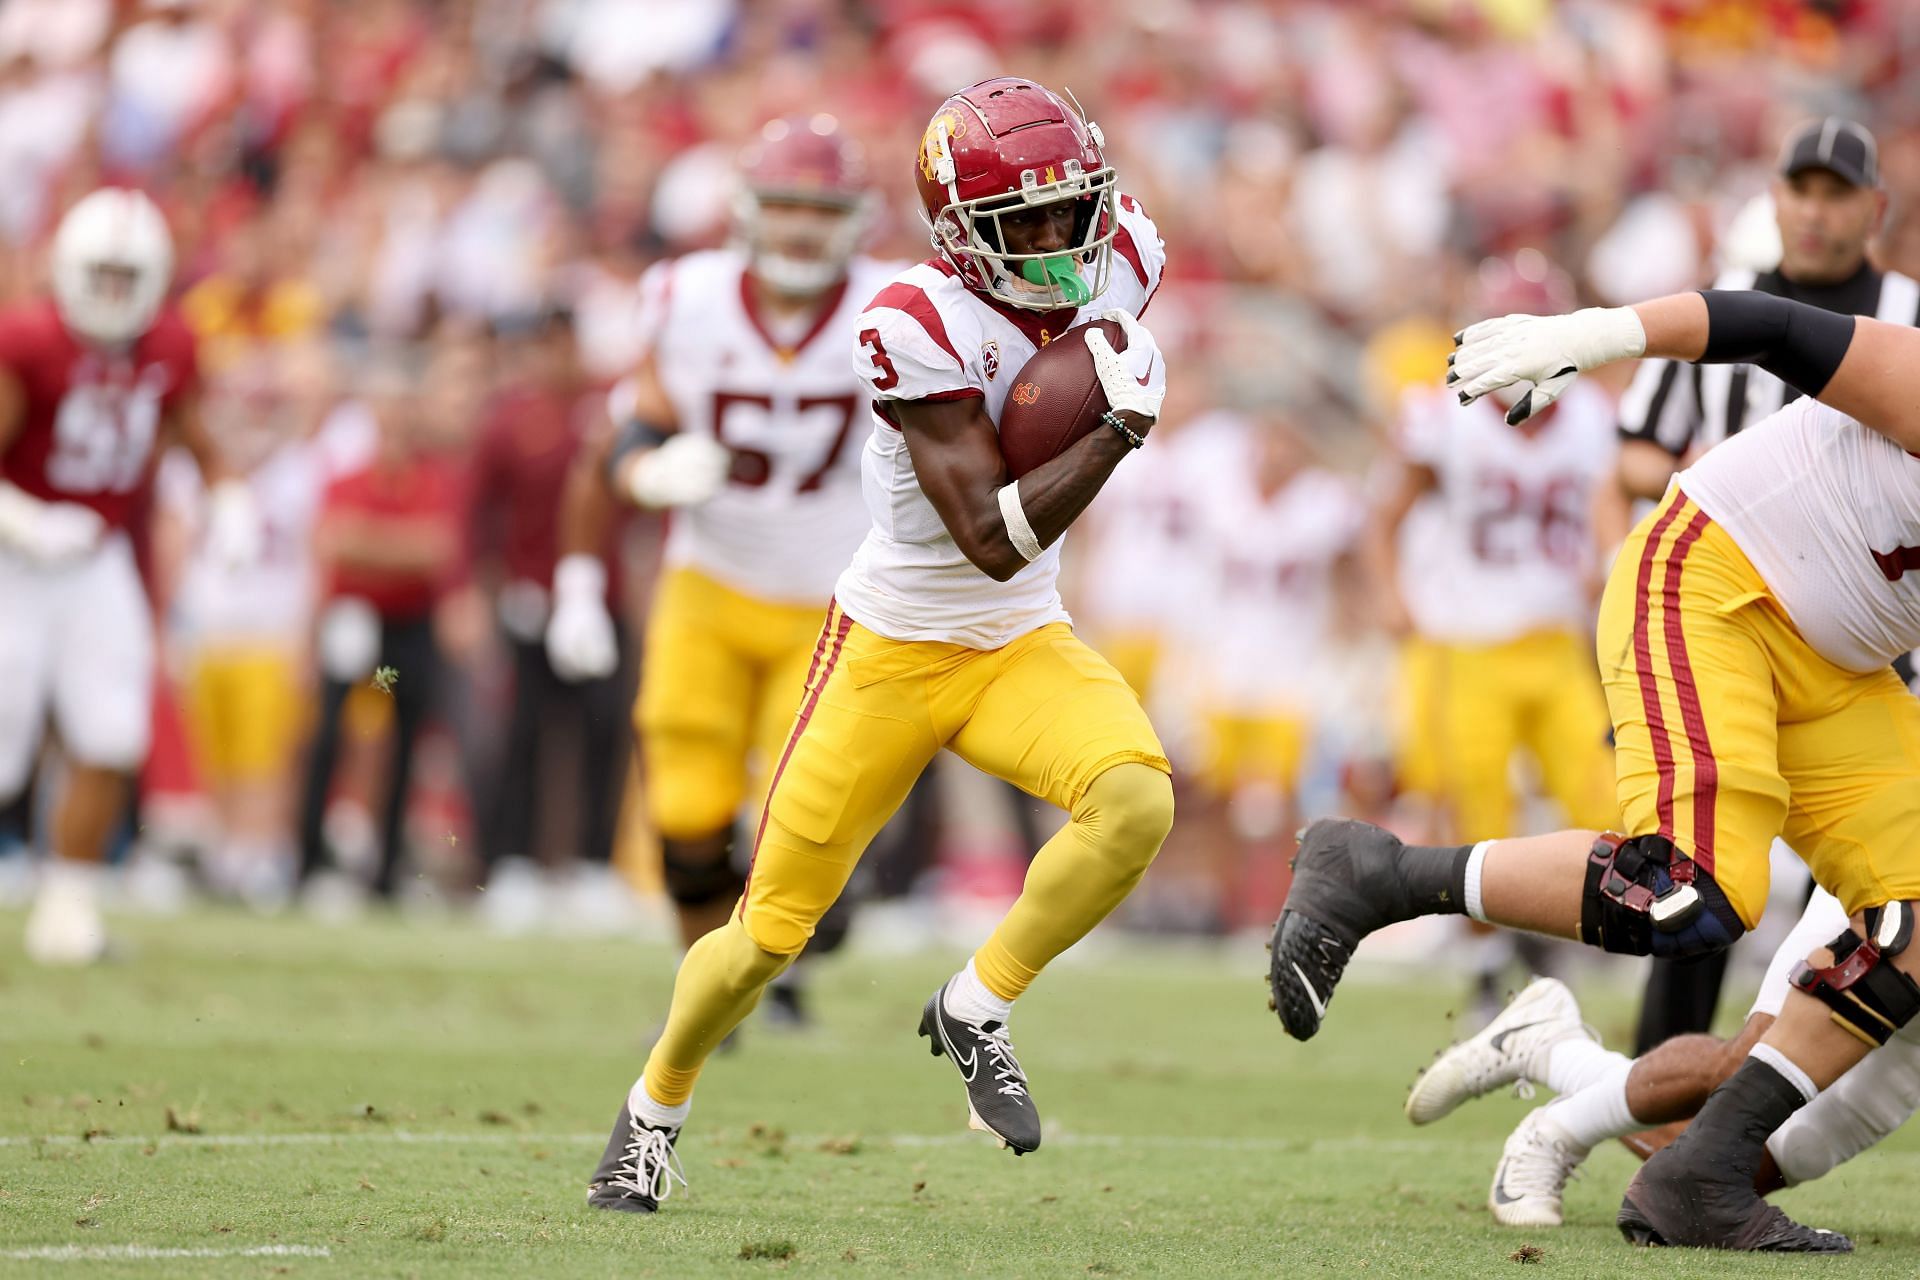 Jordan Addison #3 of the USC Trojans runs in for a touchdown against the Stanford Cardinal